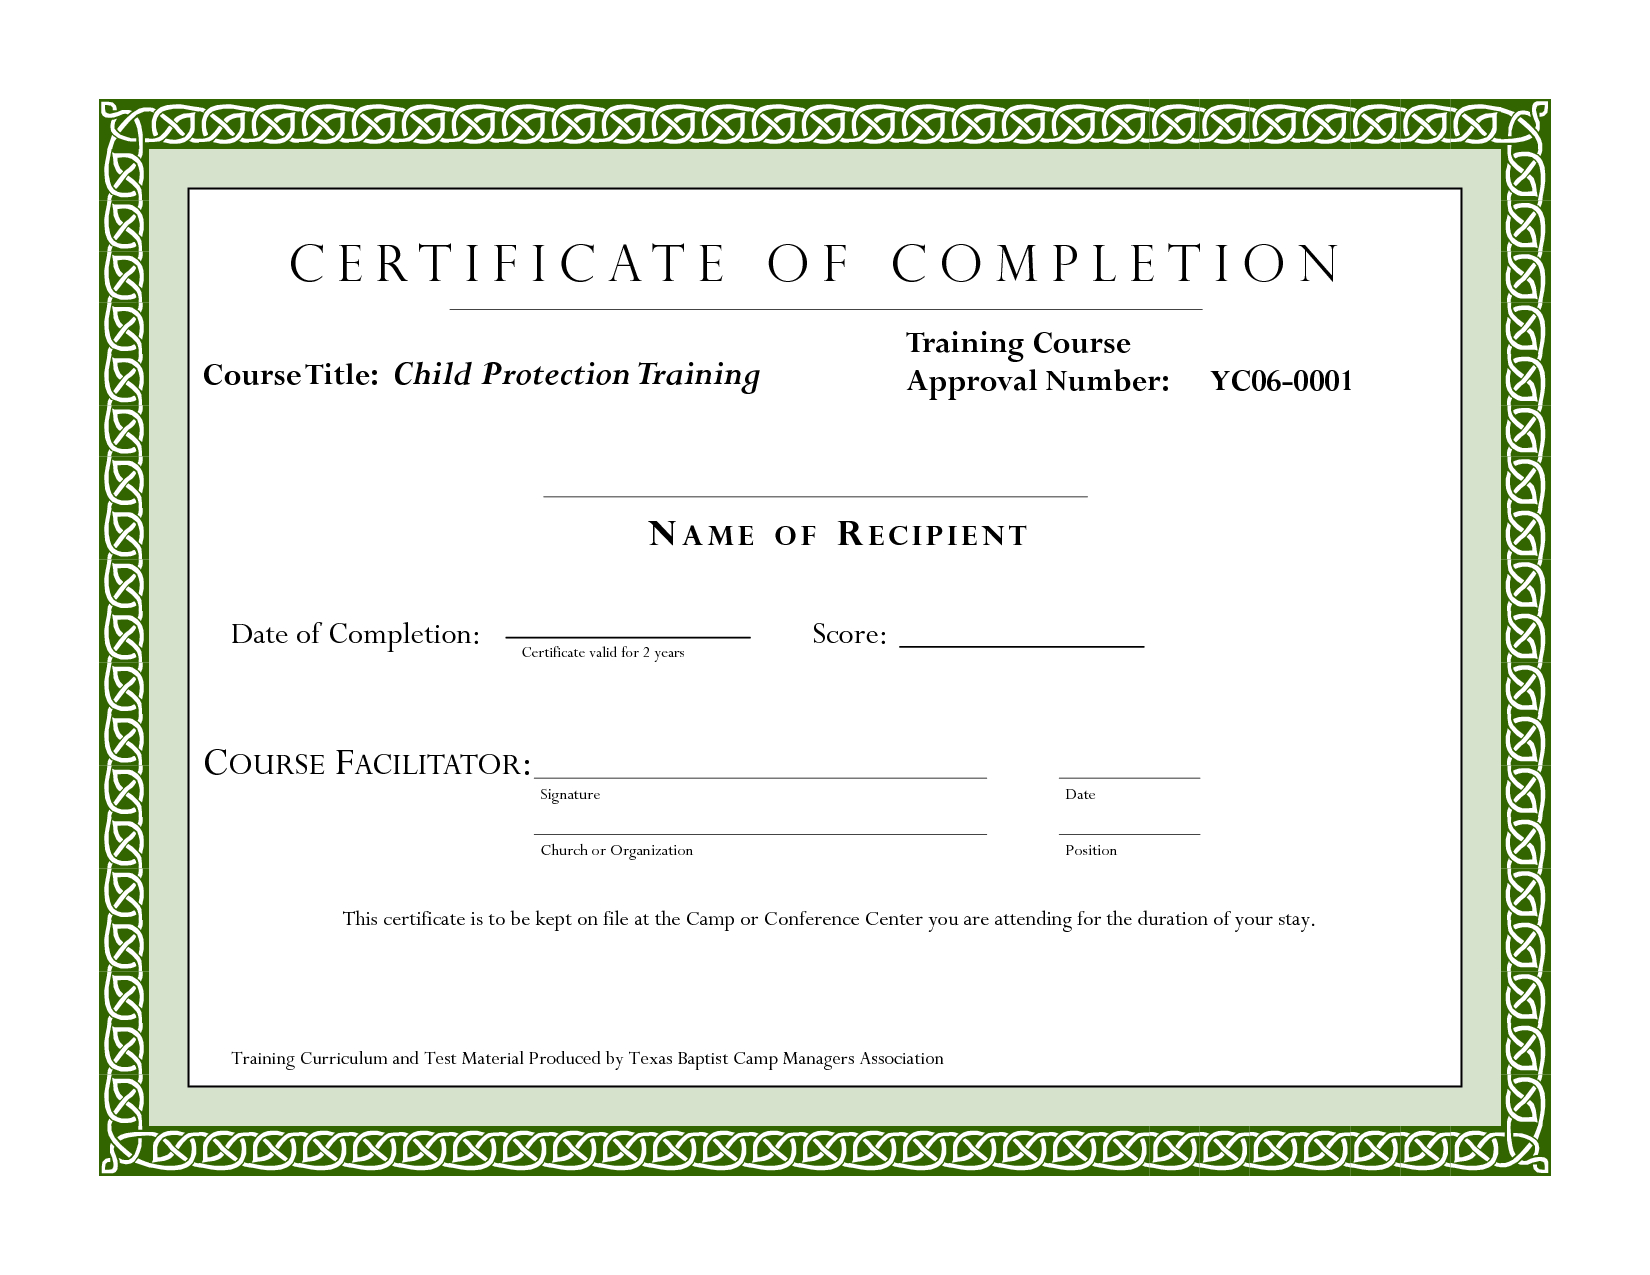 Course Completion Certificate Template | Certificate Of In Army Certificate Of Completion Template